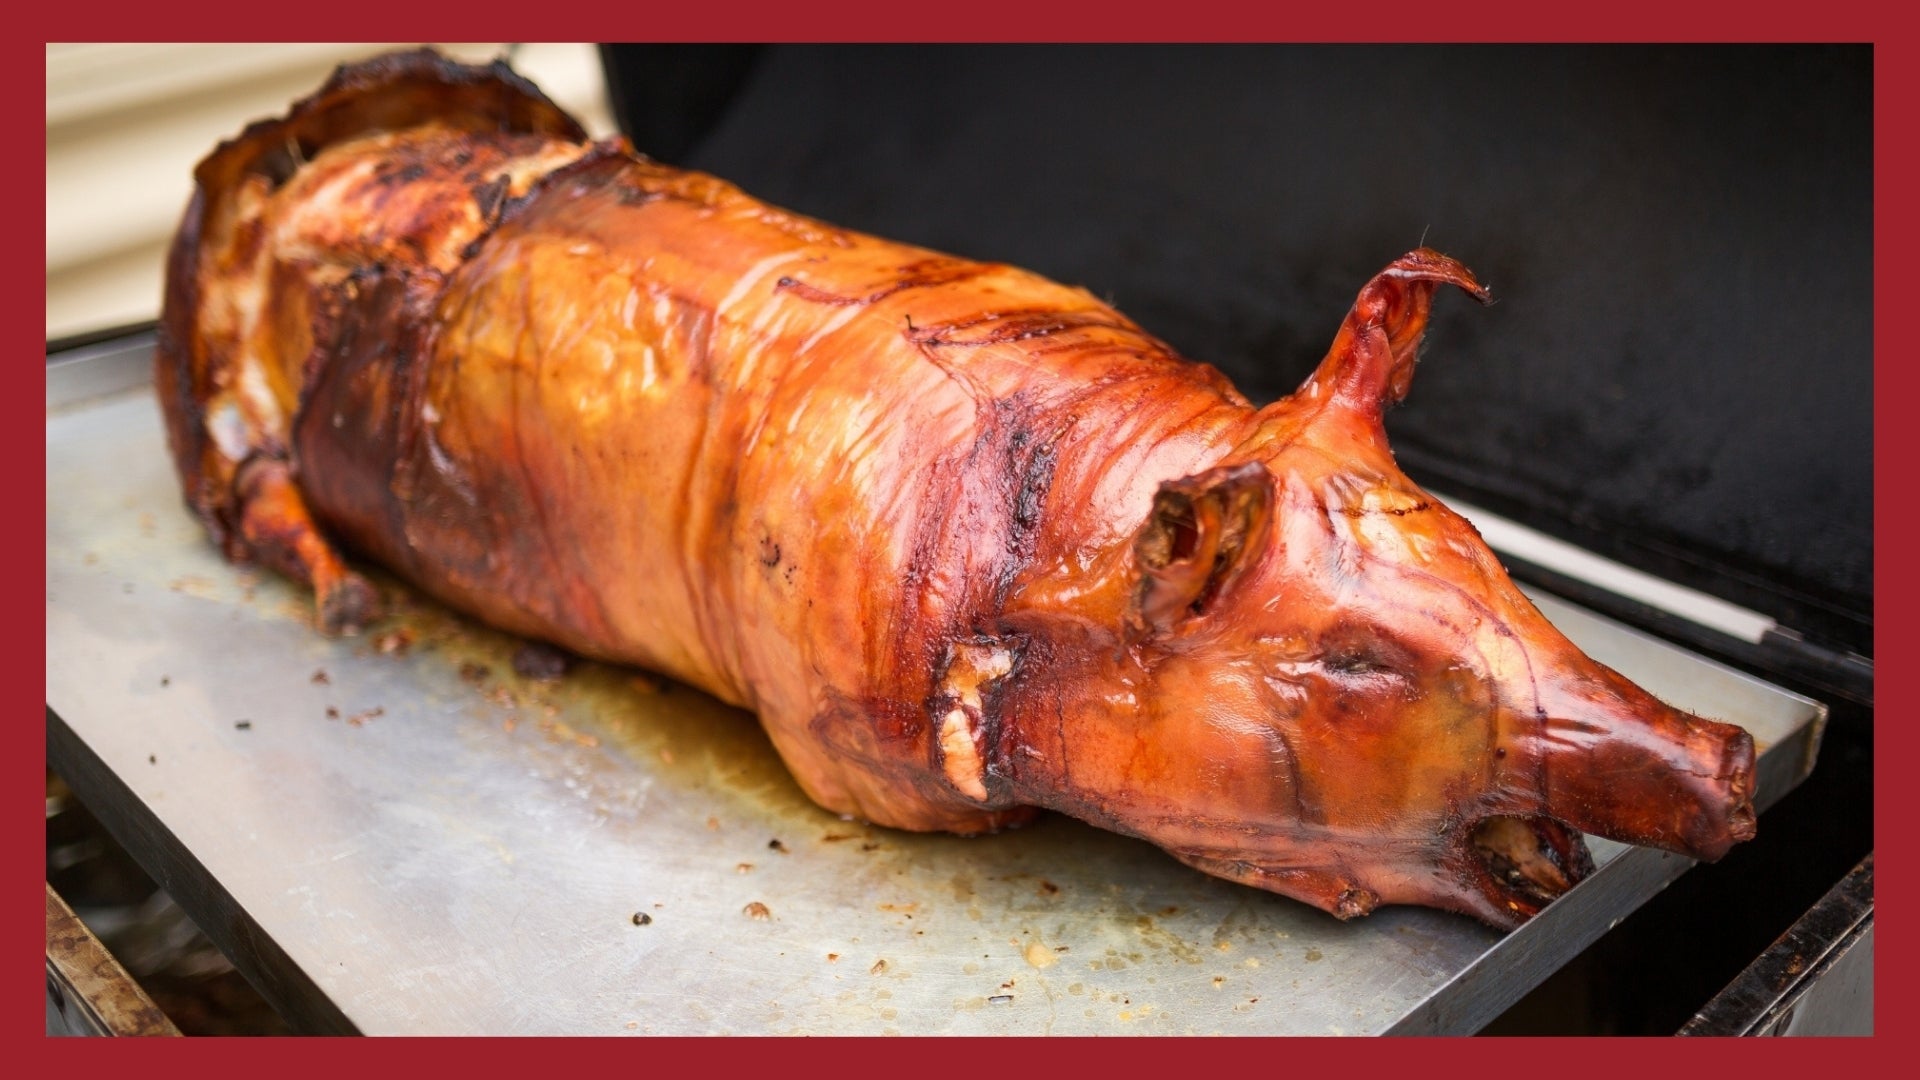 A whole suckling pig that is freshly cooked with golden brown skin.